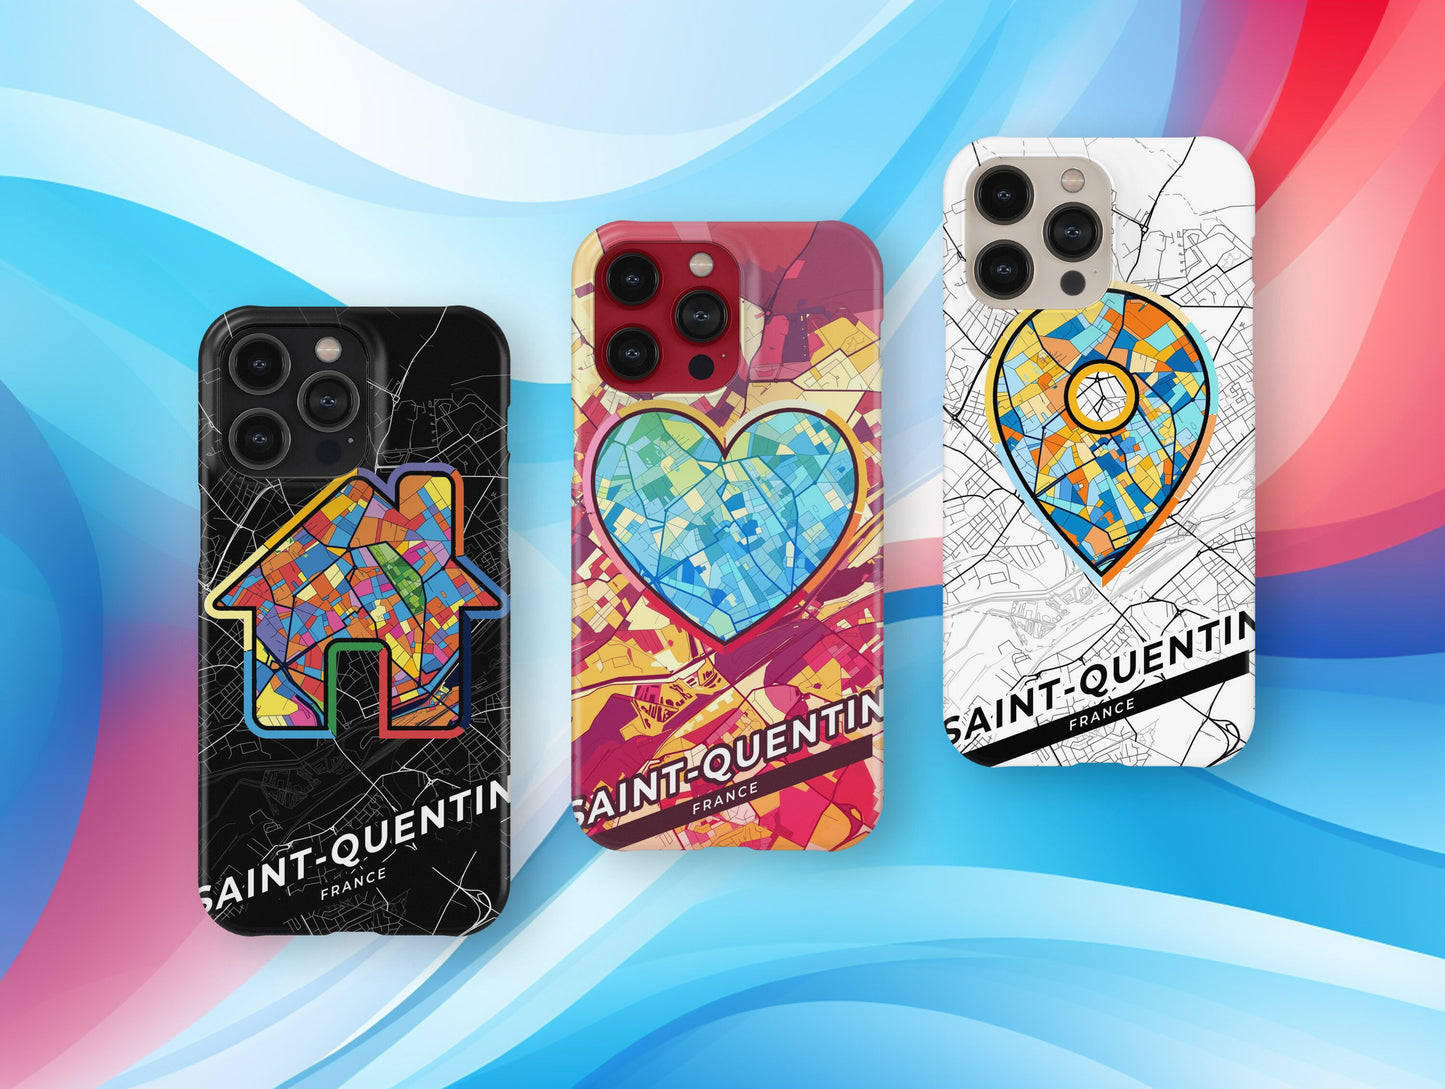 Saint-Quentin France slim phone case with colorful icon. Birthday, wedding or housewarming gift. Couple match cases.